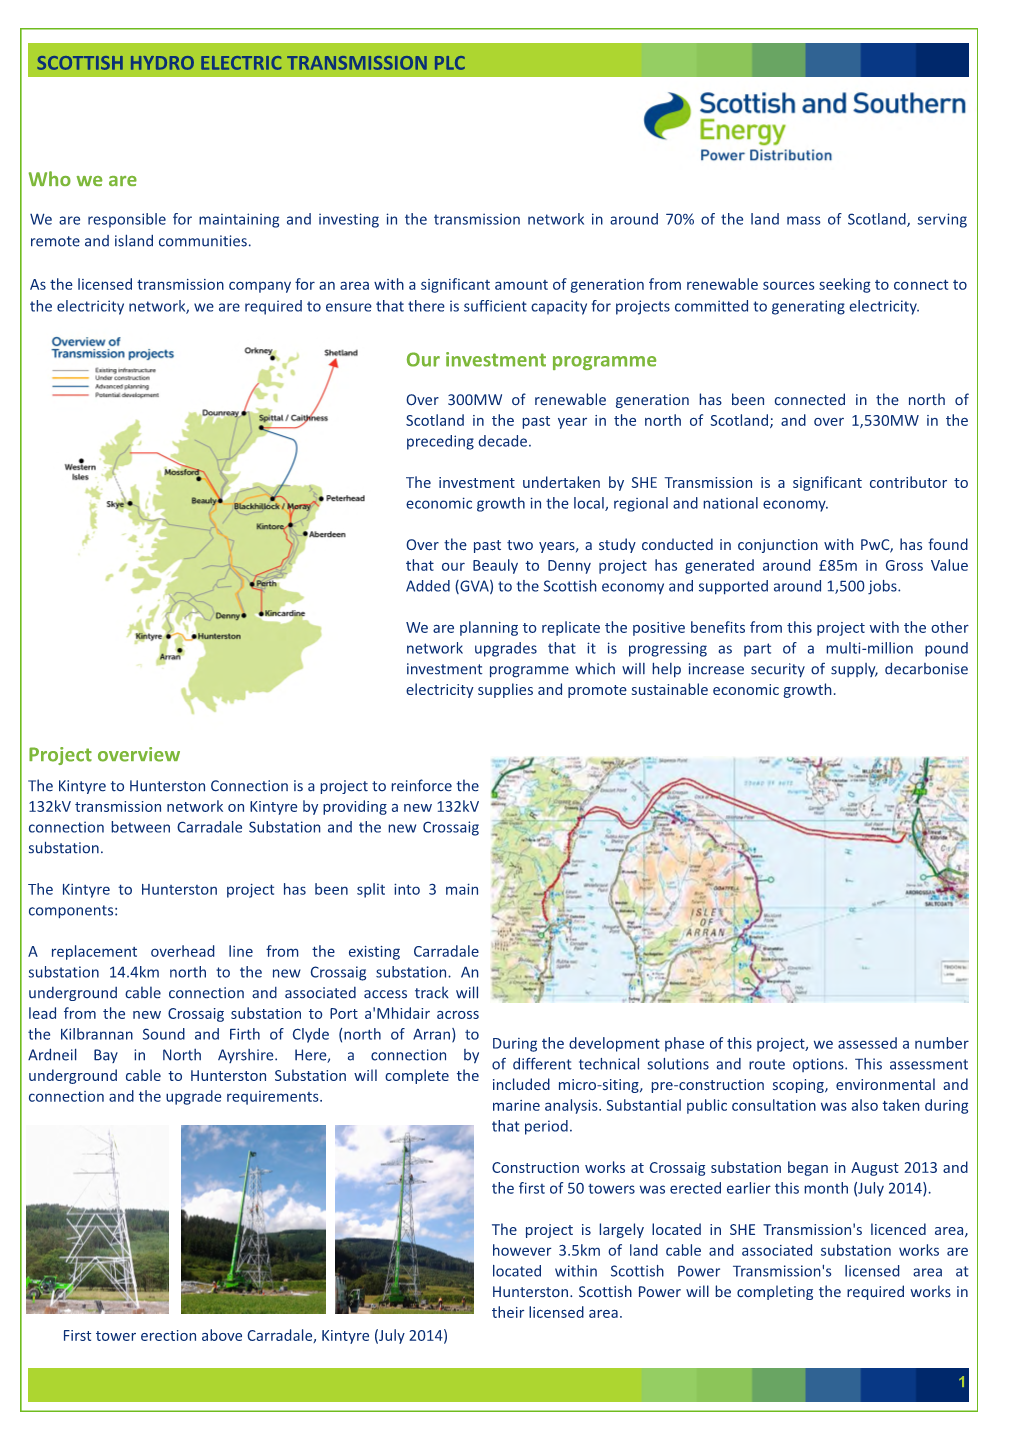 Kintyre Project Overview